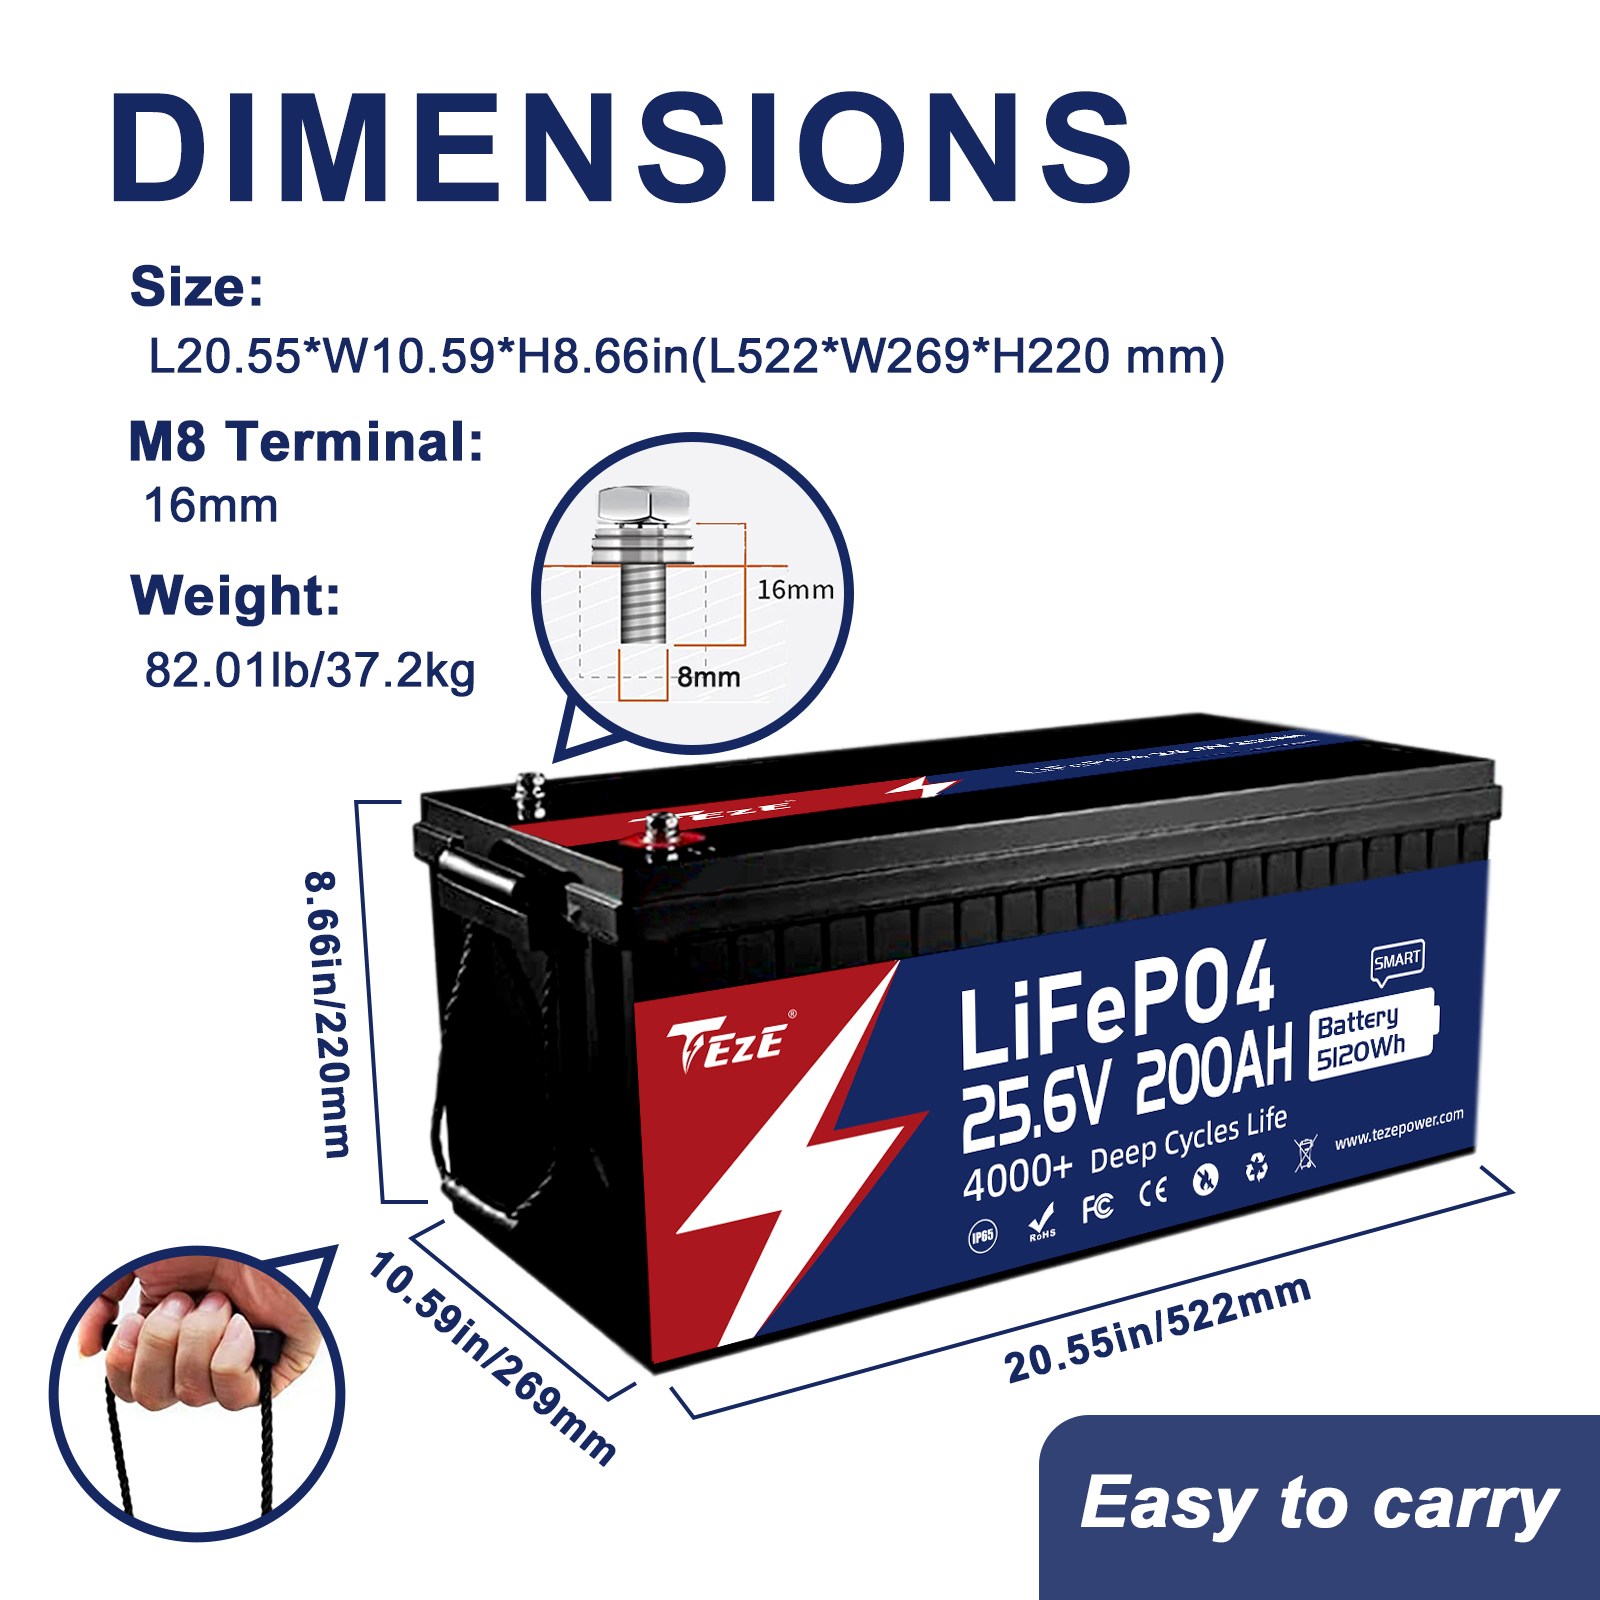 New Add WiFi-TezePower 24V 200Ah LiFePO4 Battery with WIFI and Bluetooth,  Self-heating and Active Balancer, Built-in 200A Daly BMS(WIFI External